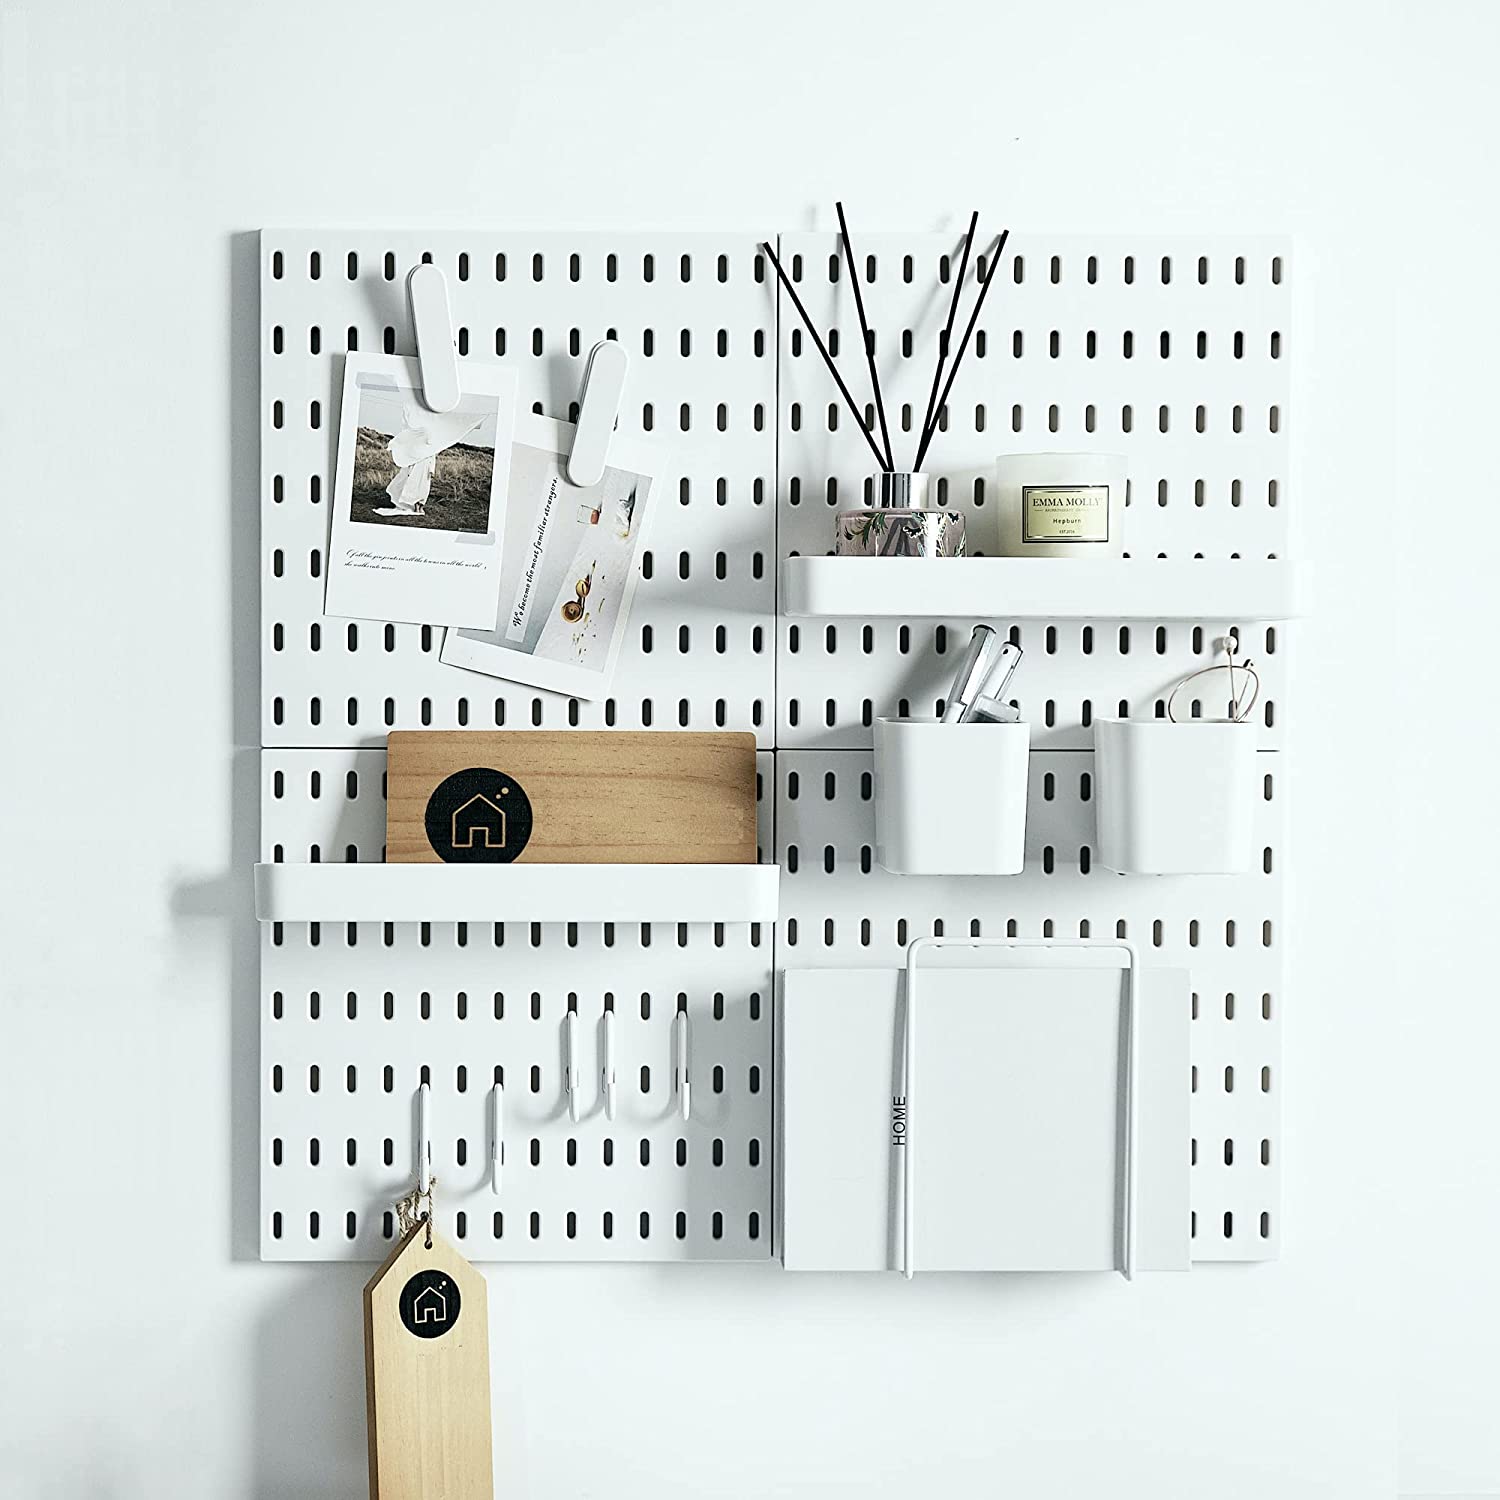 a pegboard organizer from amazon